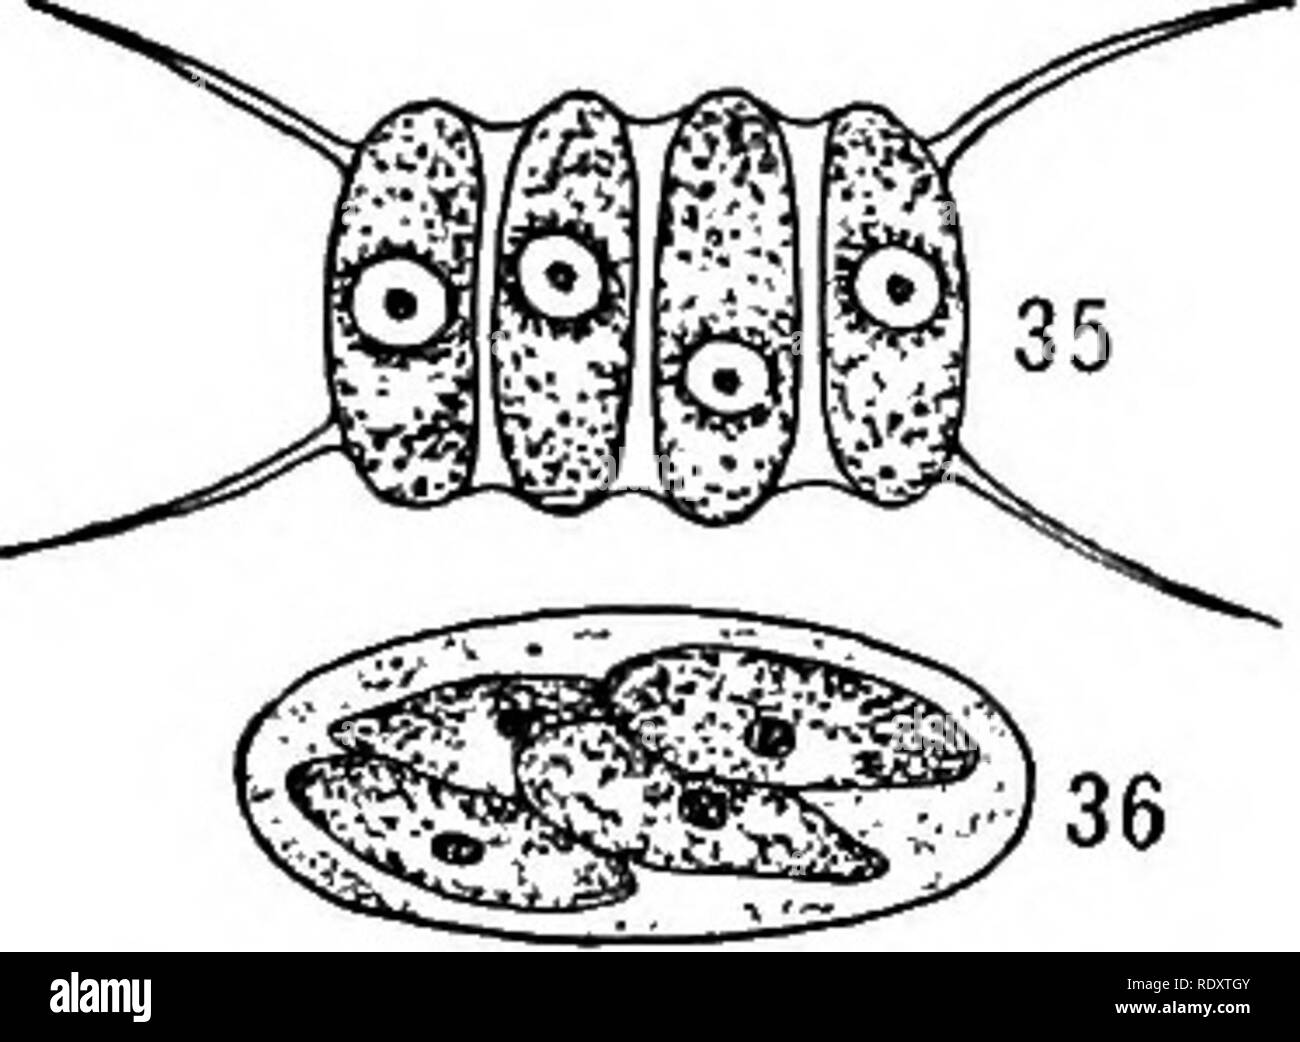 Chloroplast cell Black and White Stock Photos & Images - Alamy